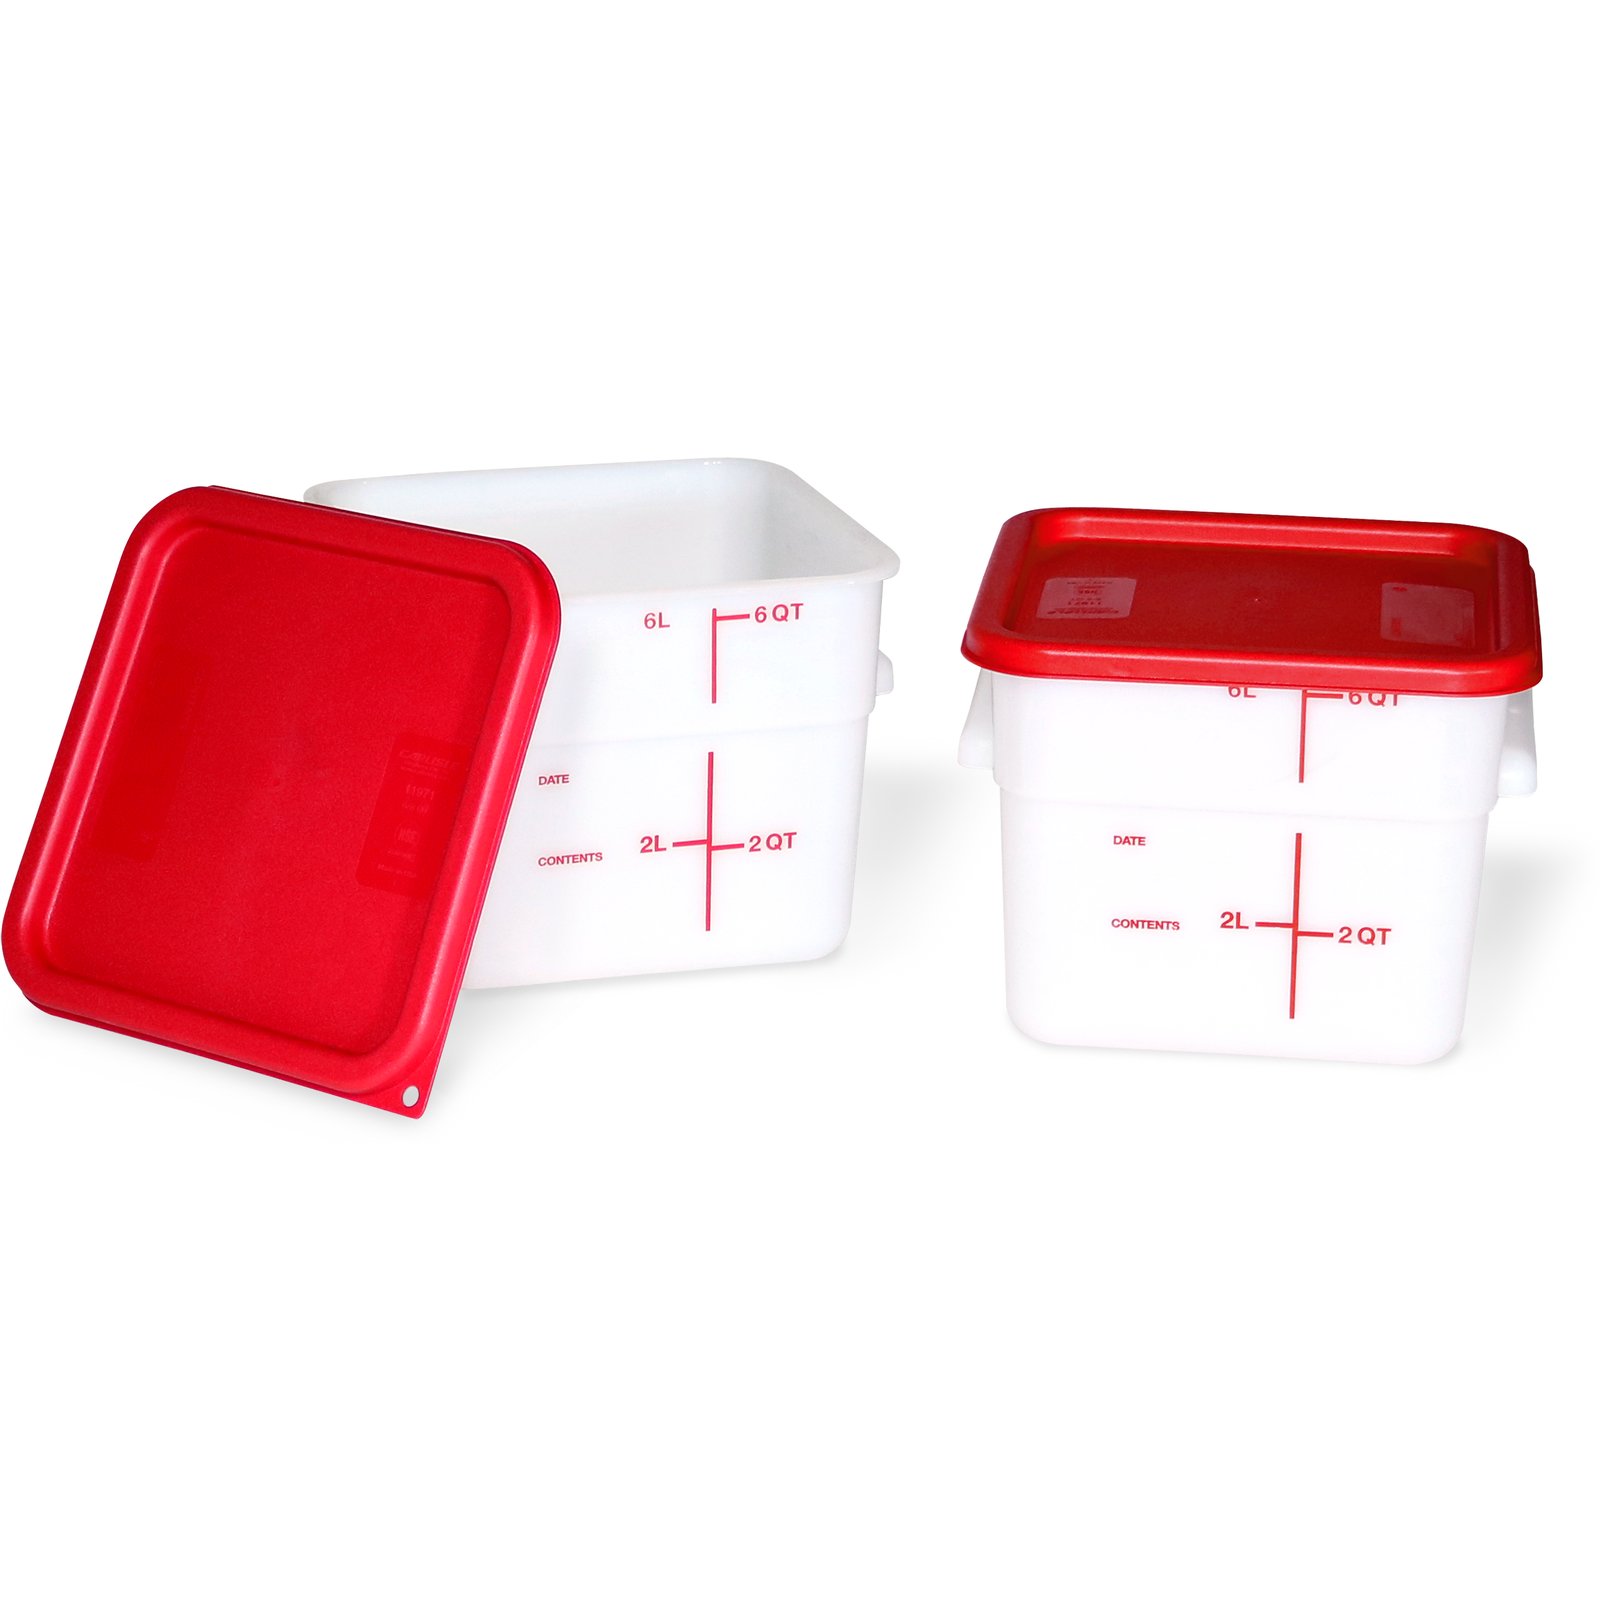 Containers with Lids - 4 Quart and 6 Quart Food Storage Set - 2 Pack